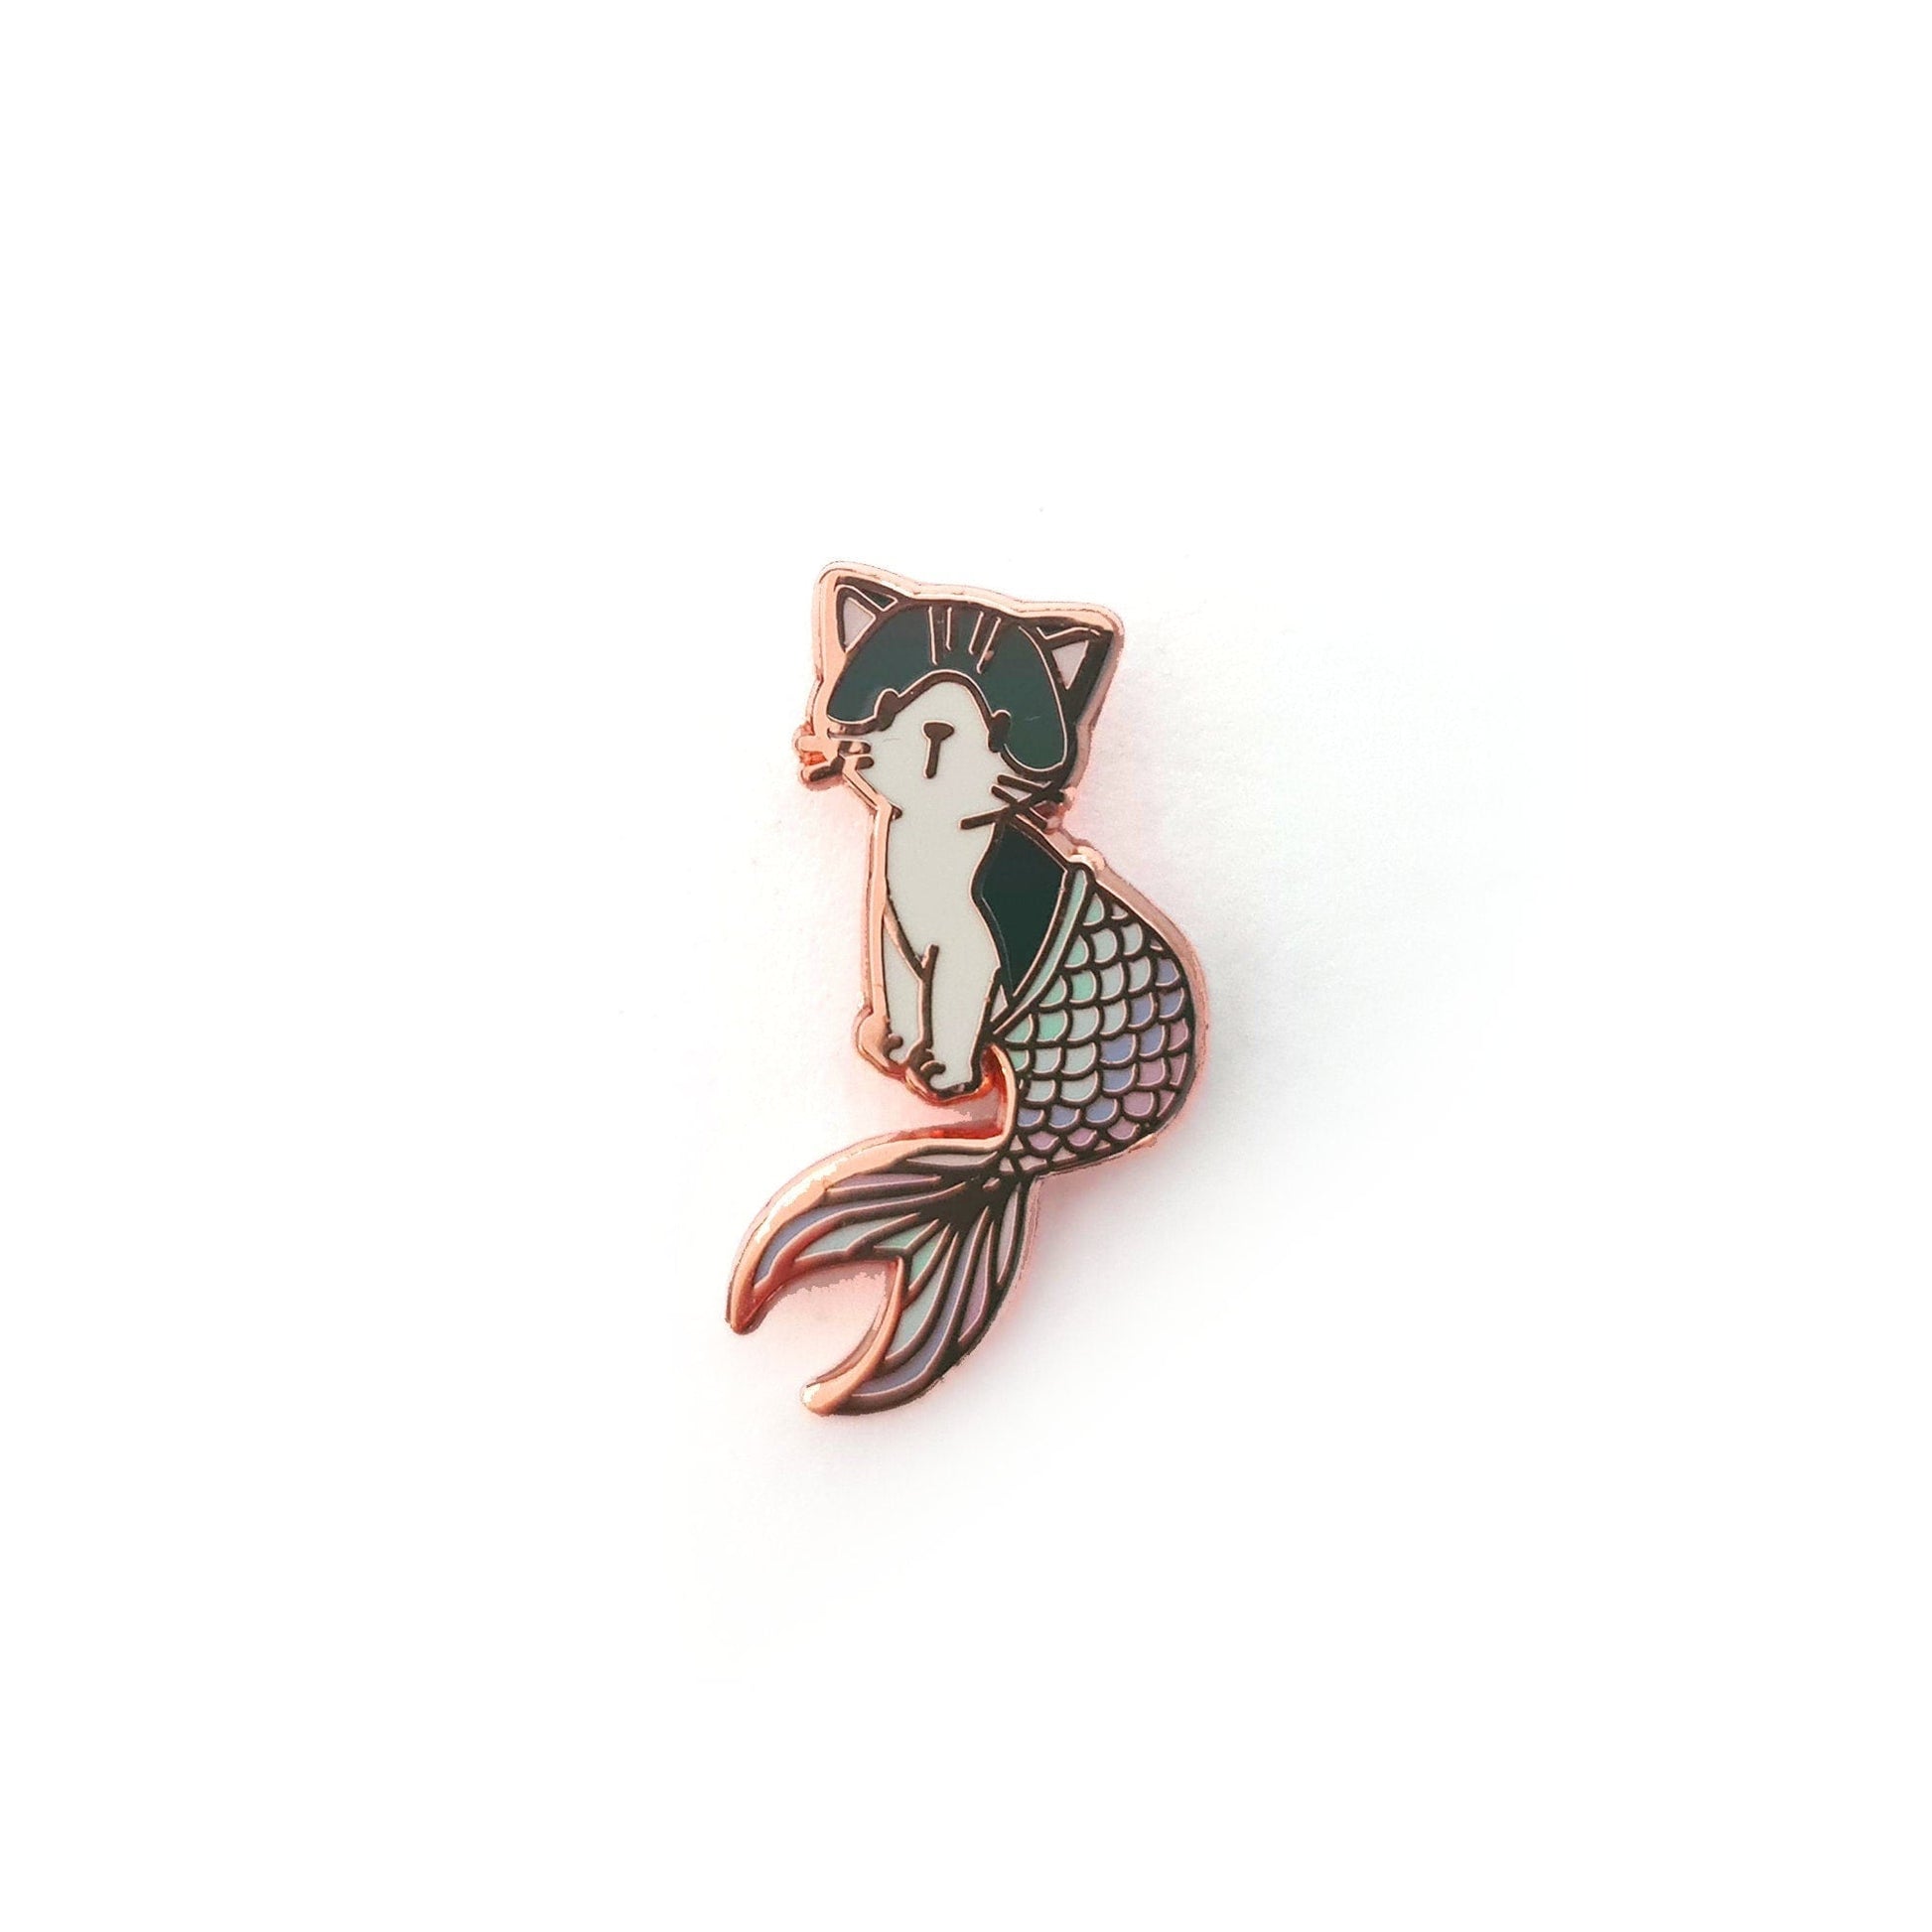 Purrmaid - Small Enamel Pin, Grey & White Cat with Pastel Mermaid Tail, Pins, Brooches & Lapel Pins